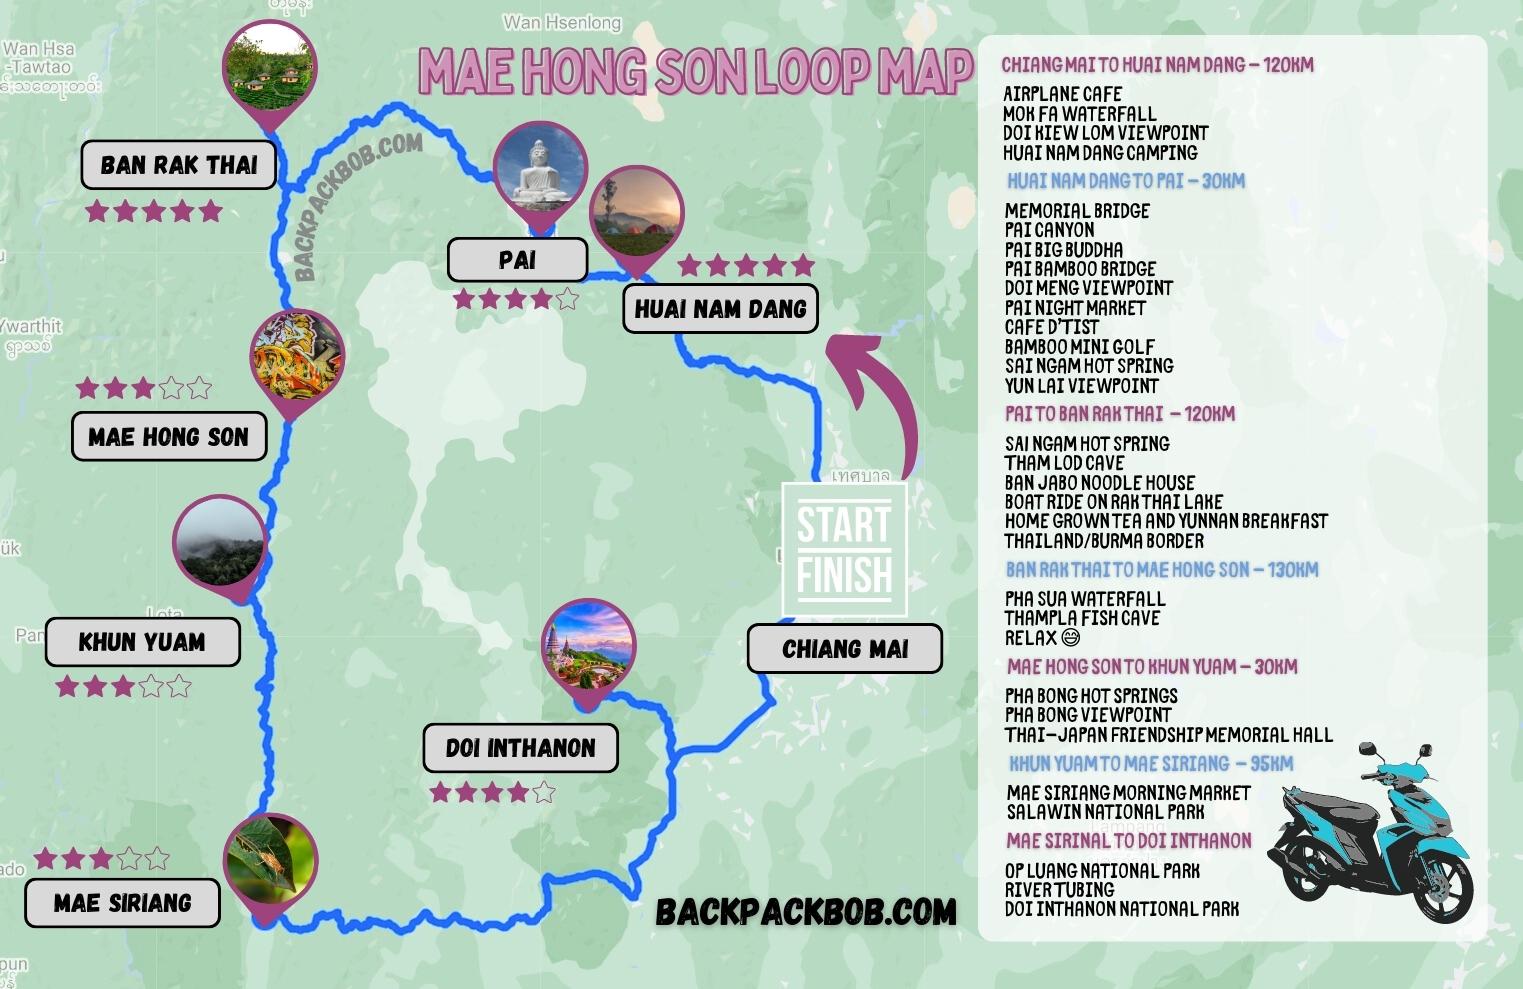 backpack bob free detailed map of mae hong son loop mae hong son loop map for tourists and travellers useful mae hong son loop map with activities towns and detainations to sleep motorcycle loop map thailand